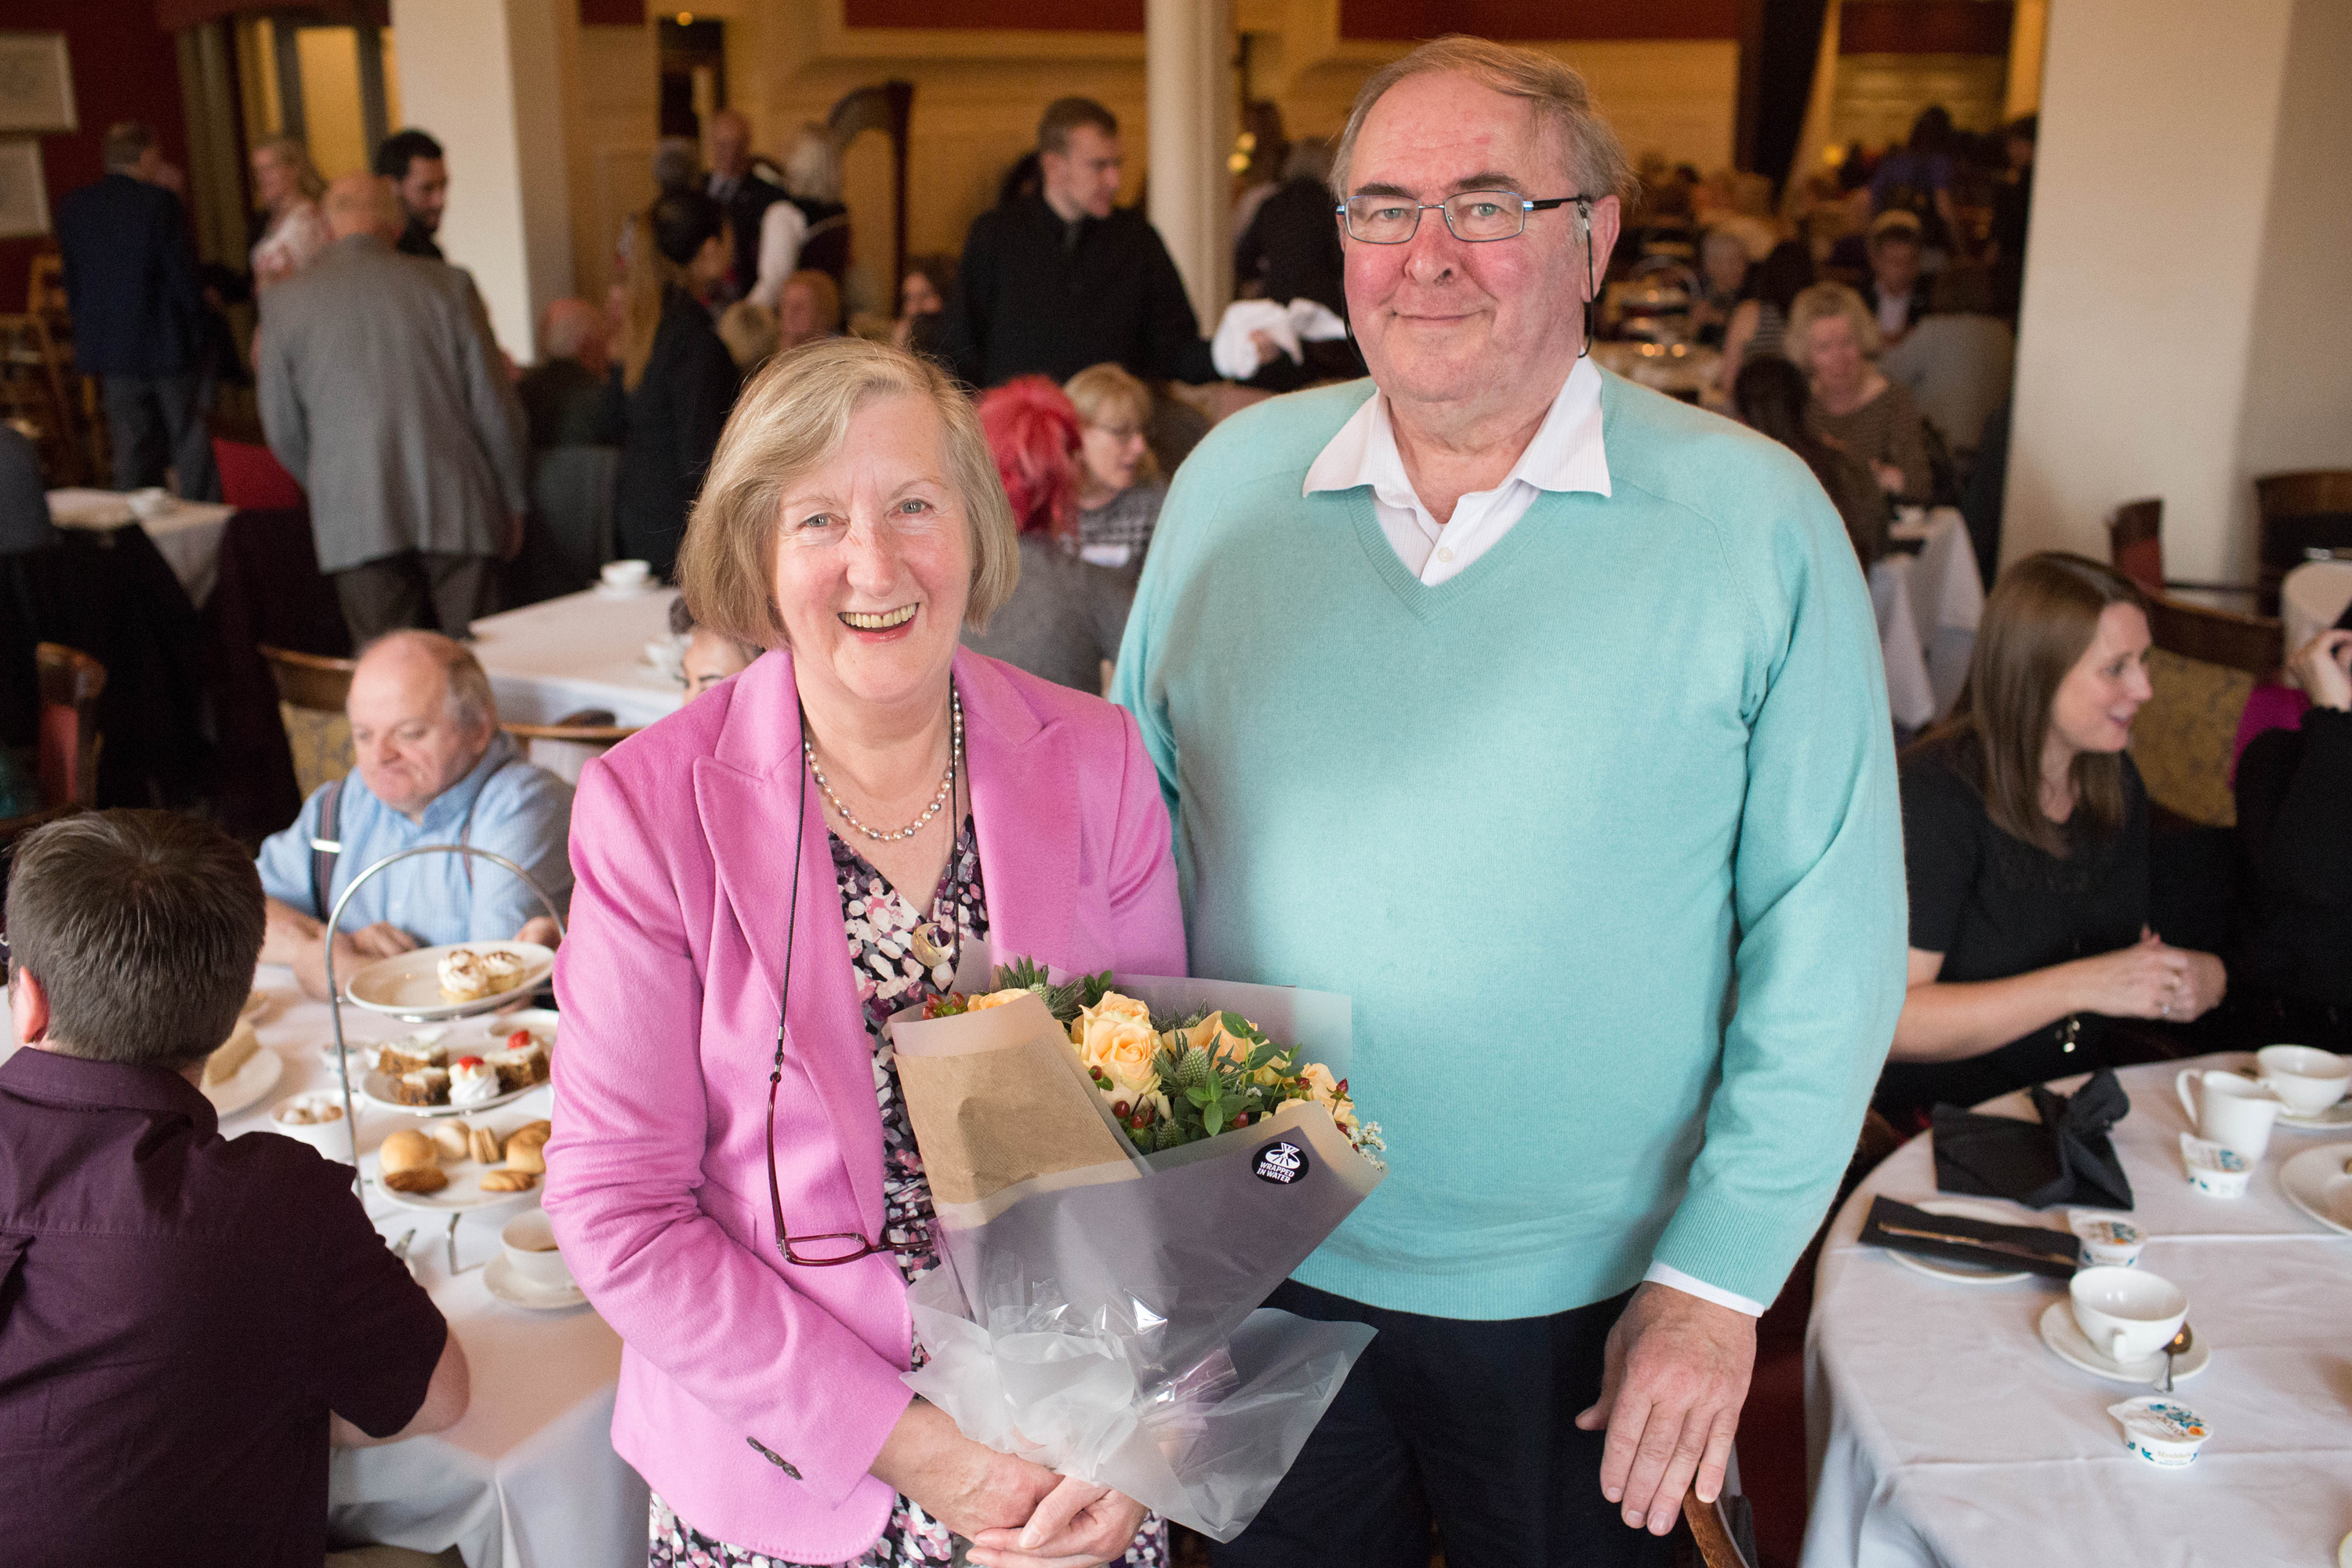 The Contact the Elderly Scotland Volunteer Thank You and Awards event at Crieff Hydro